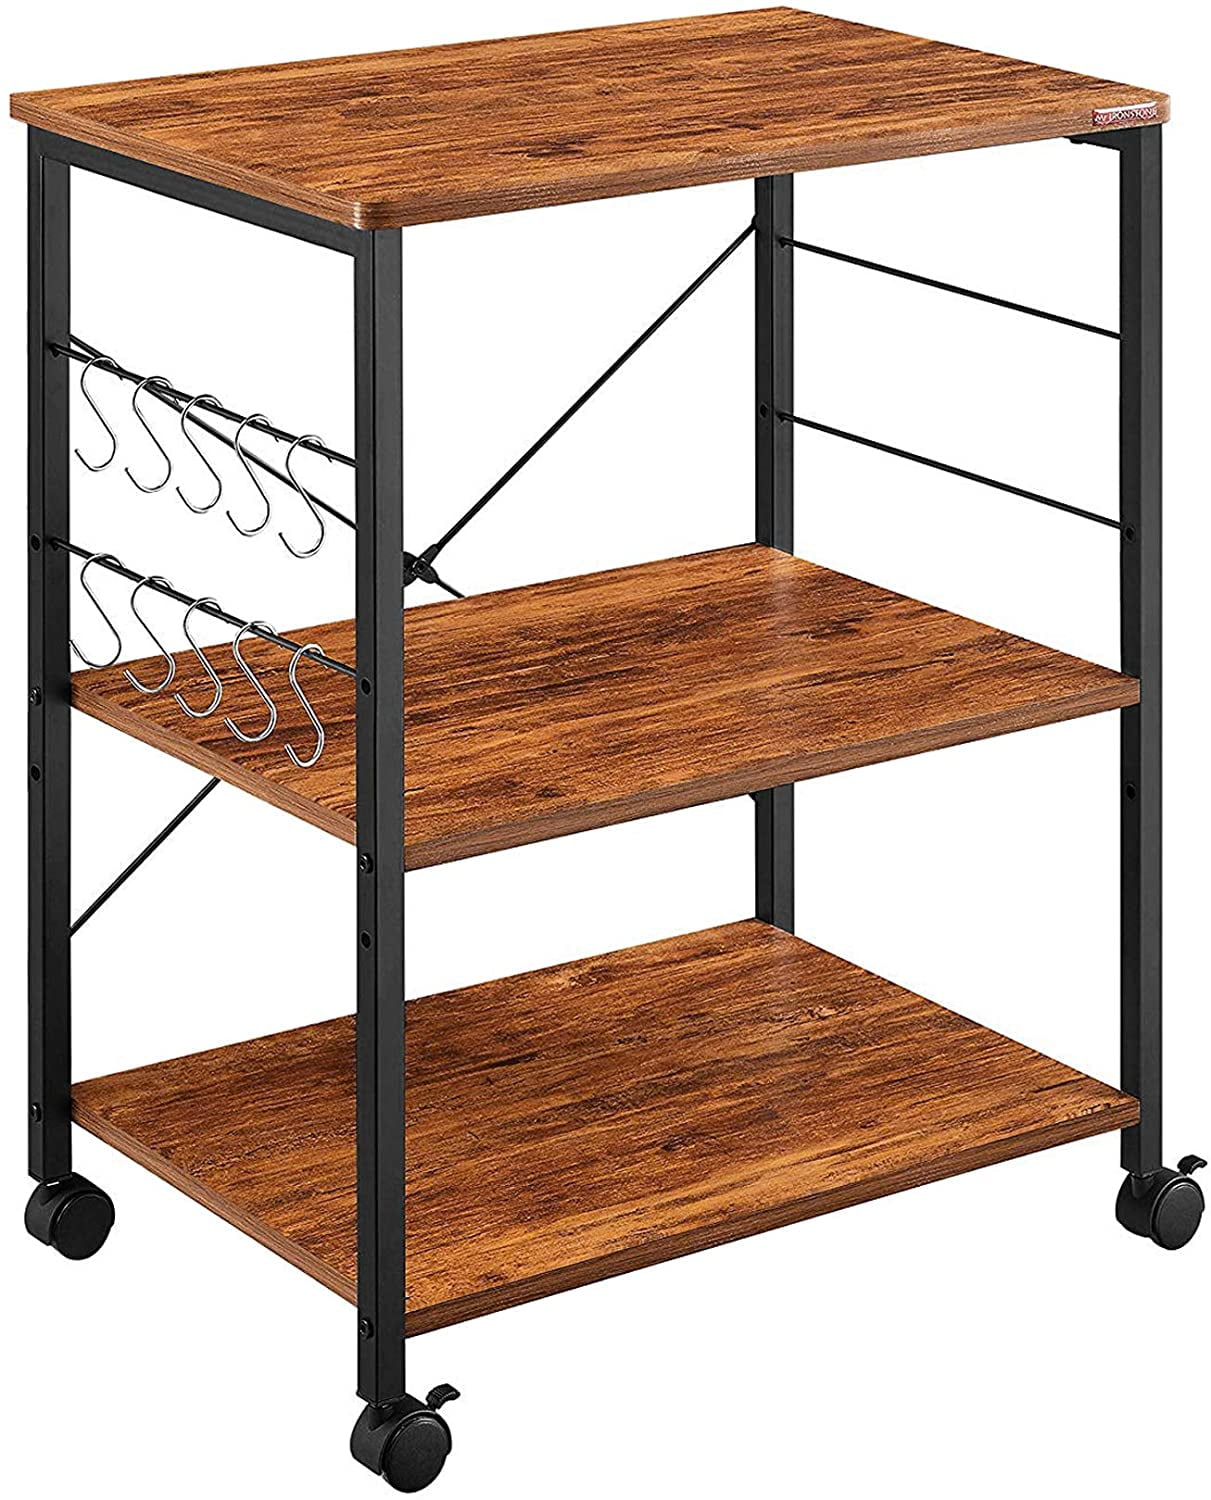 Rustic Brown Storage Cart Workstation Shelf SUR-SOUL 3-Tier Industrial Kitchen Bakers Rack Utility Microwave Oven Stand Microwave Stand Spice Wine Organizer